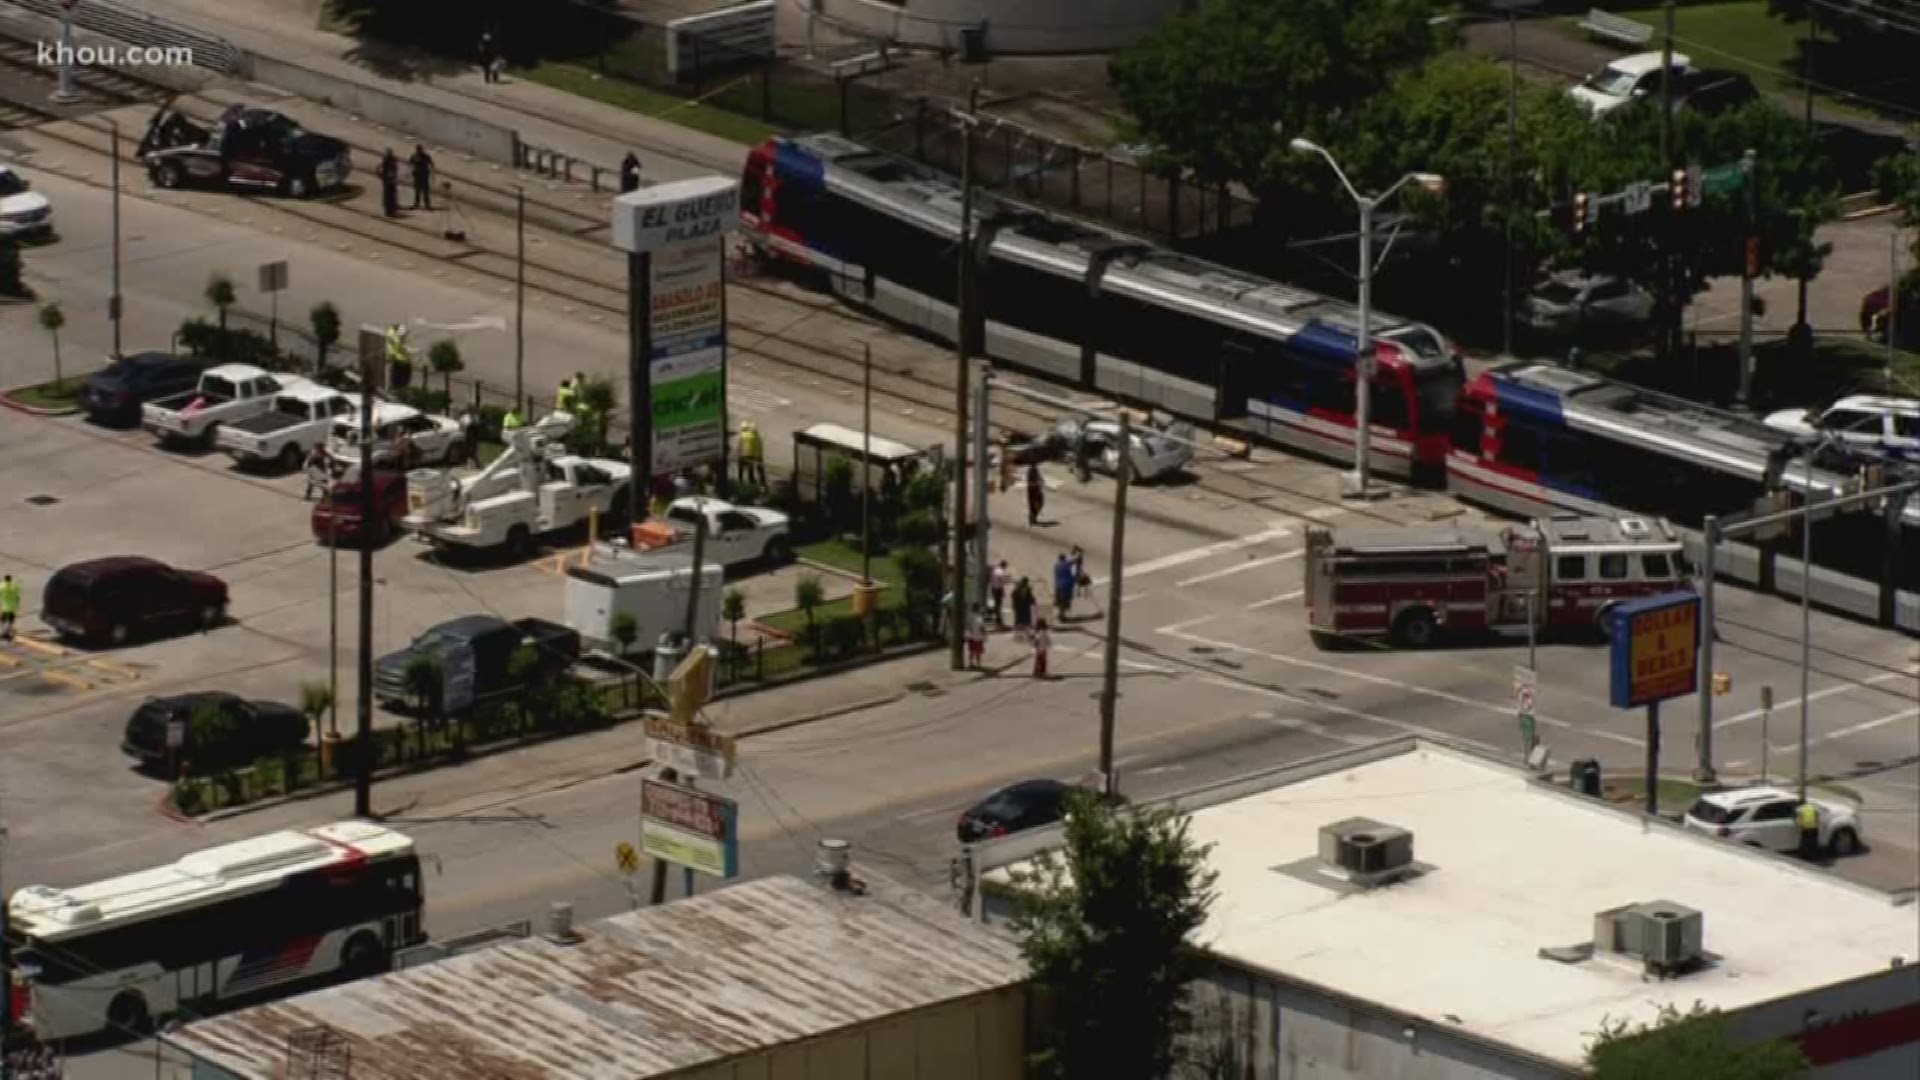 Two people were injured when a car collided with a METRO Rail train in north Houston Wednesday morning.